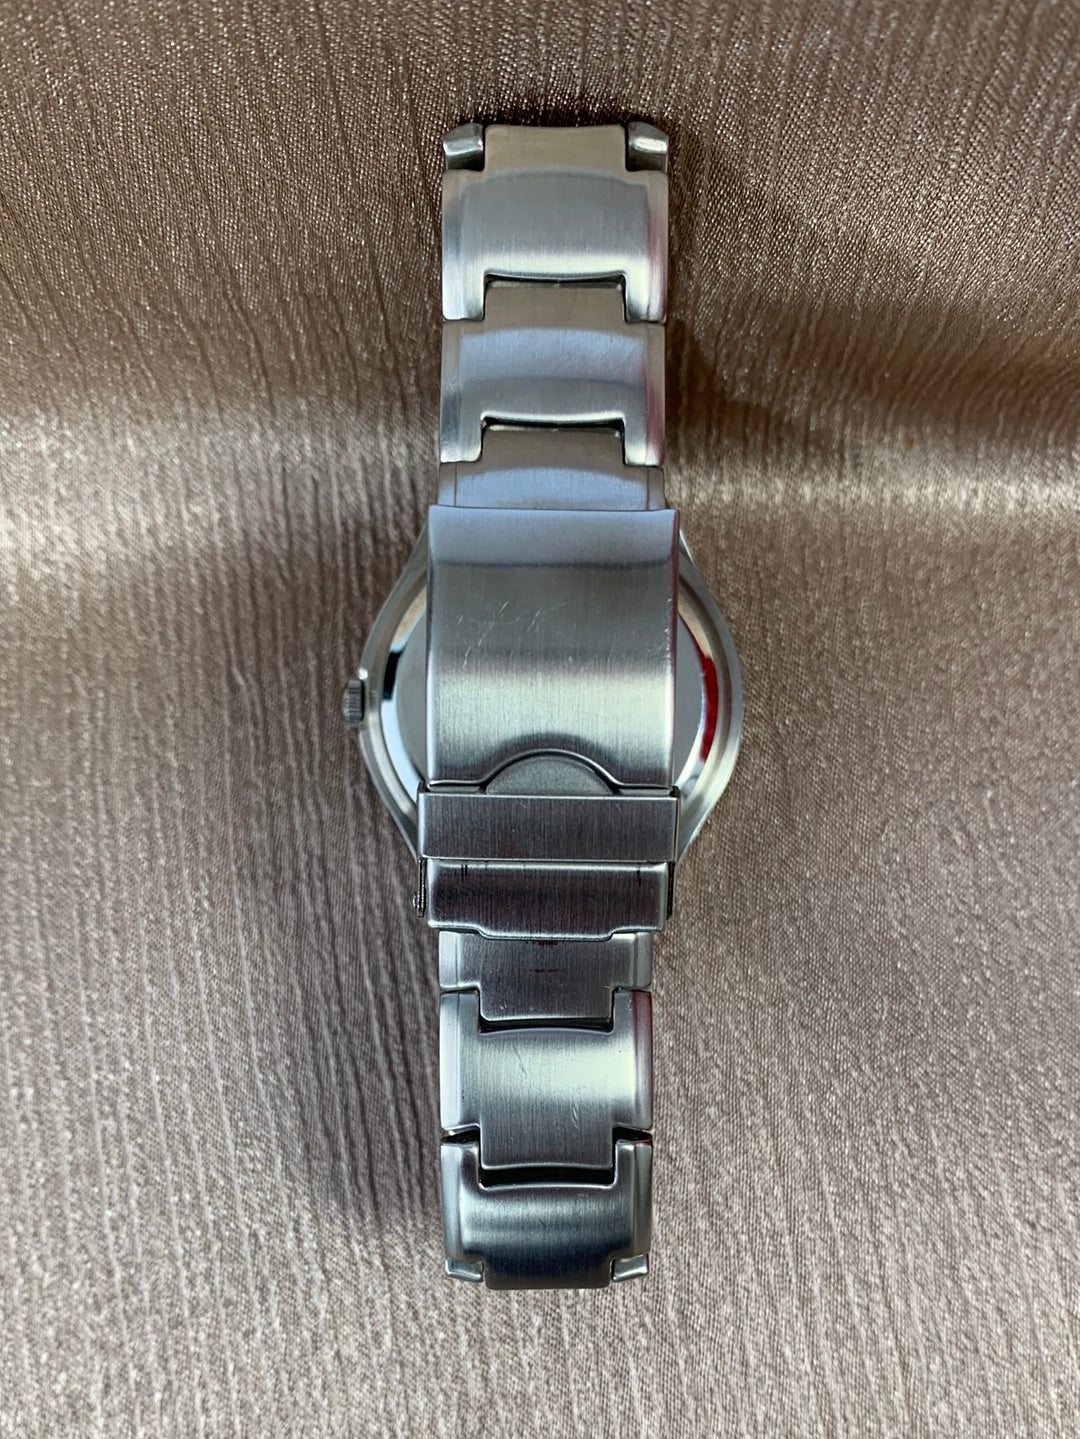 SNAP ON Brushed Stainless Steel Tool Hands 2008 Special Edition Watch